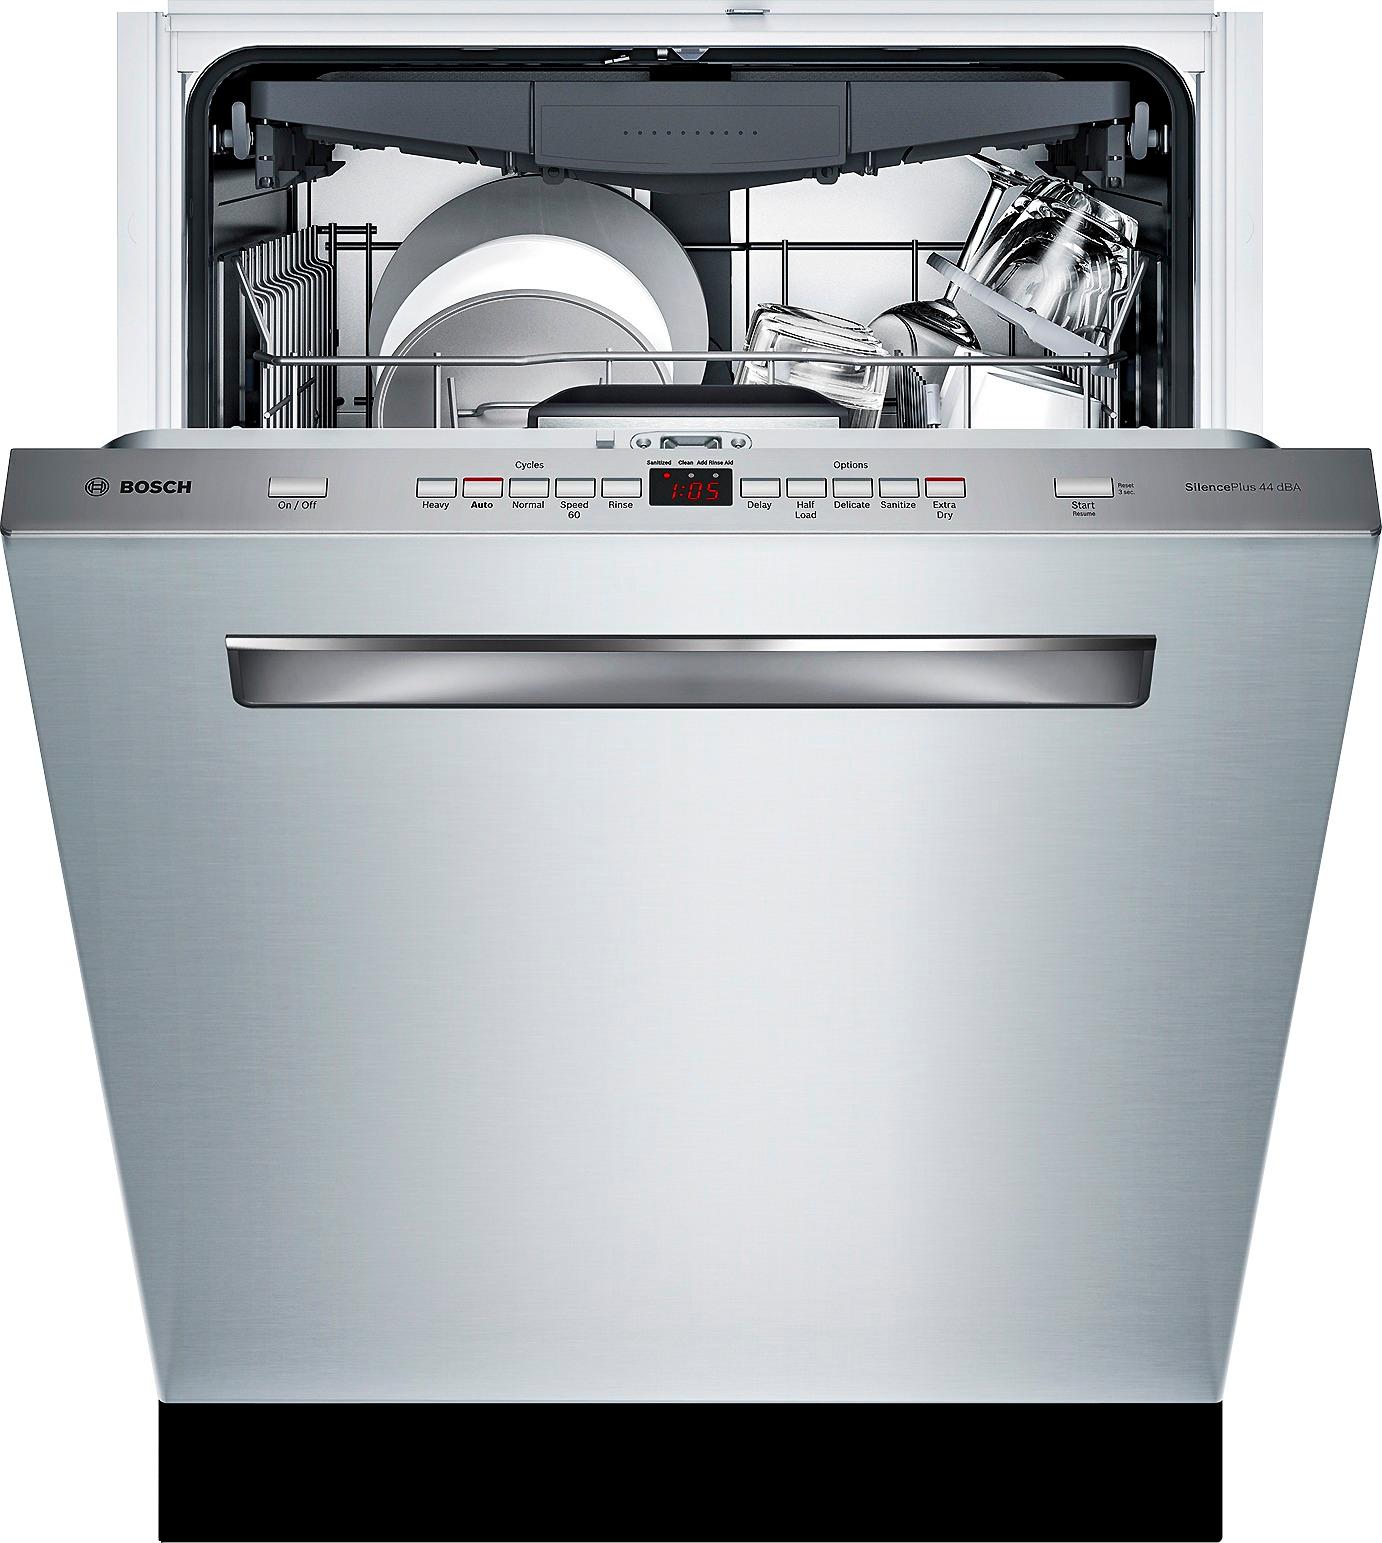 Questions and Answers Bosch 500 Series 24" Pocket Handle Dishwasher